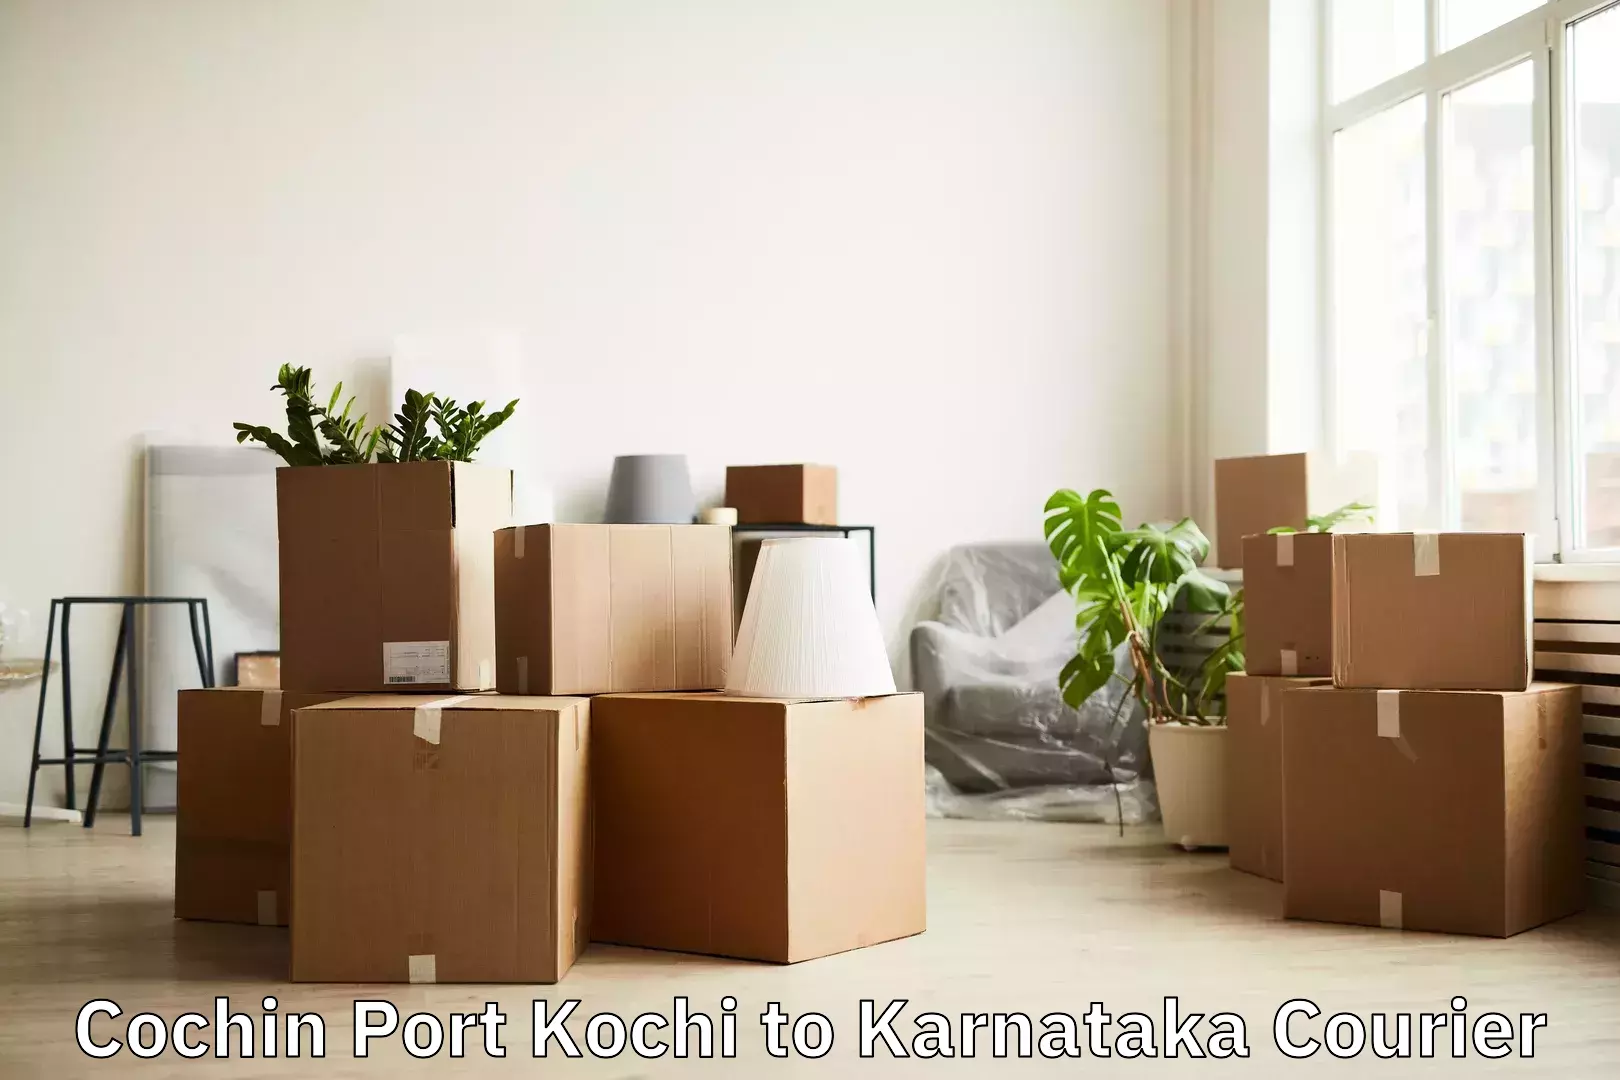 Instant baggage transport quote Cochin Port Kochi to Manipal